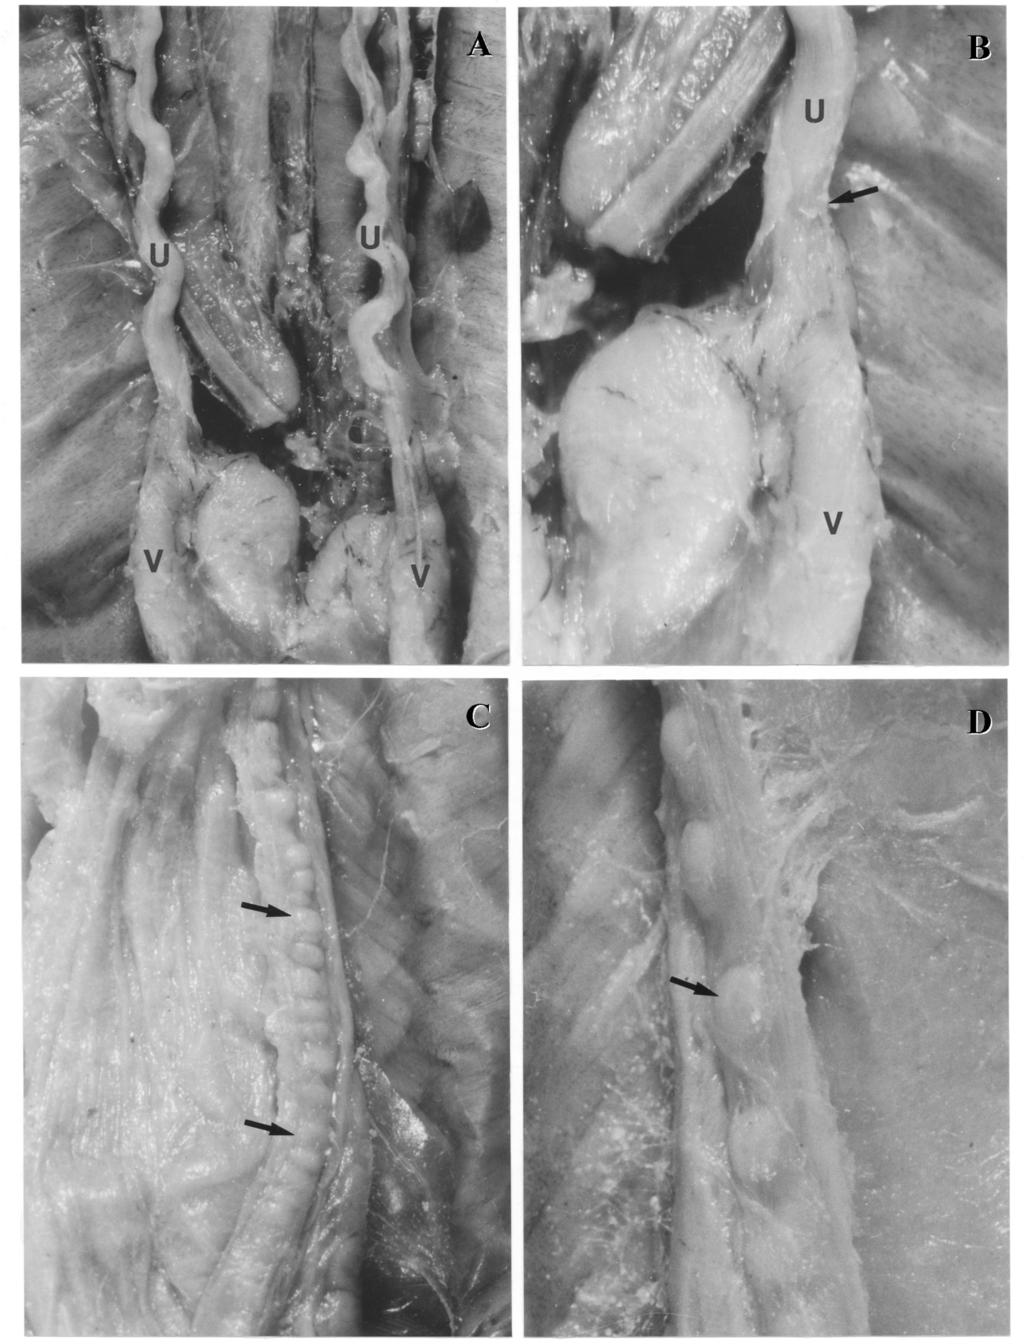 Biology of the Vipers 451 Fig. 2. Uterine muscular twisting (UMT) in Bothrops. (A) B. jararacussu: general view showing the uterus (U) and vagina (V) (x 2.0). (B) B.